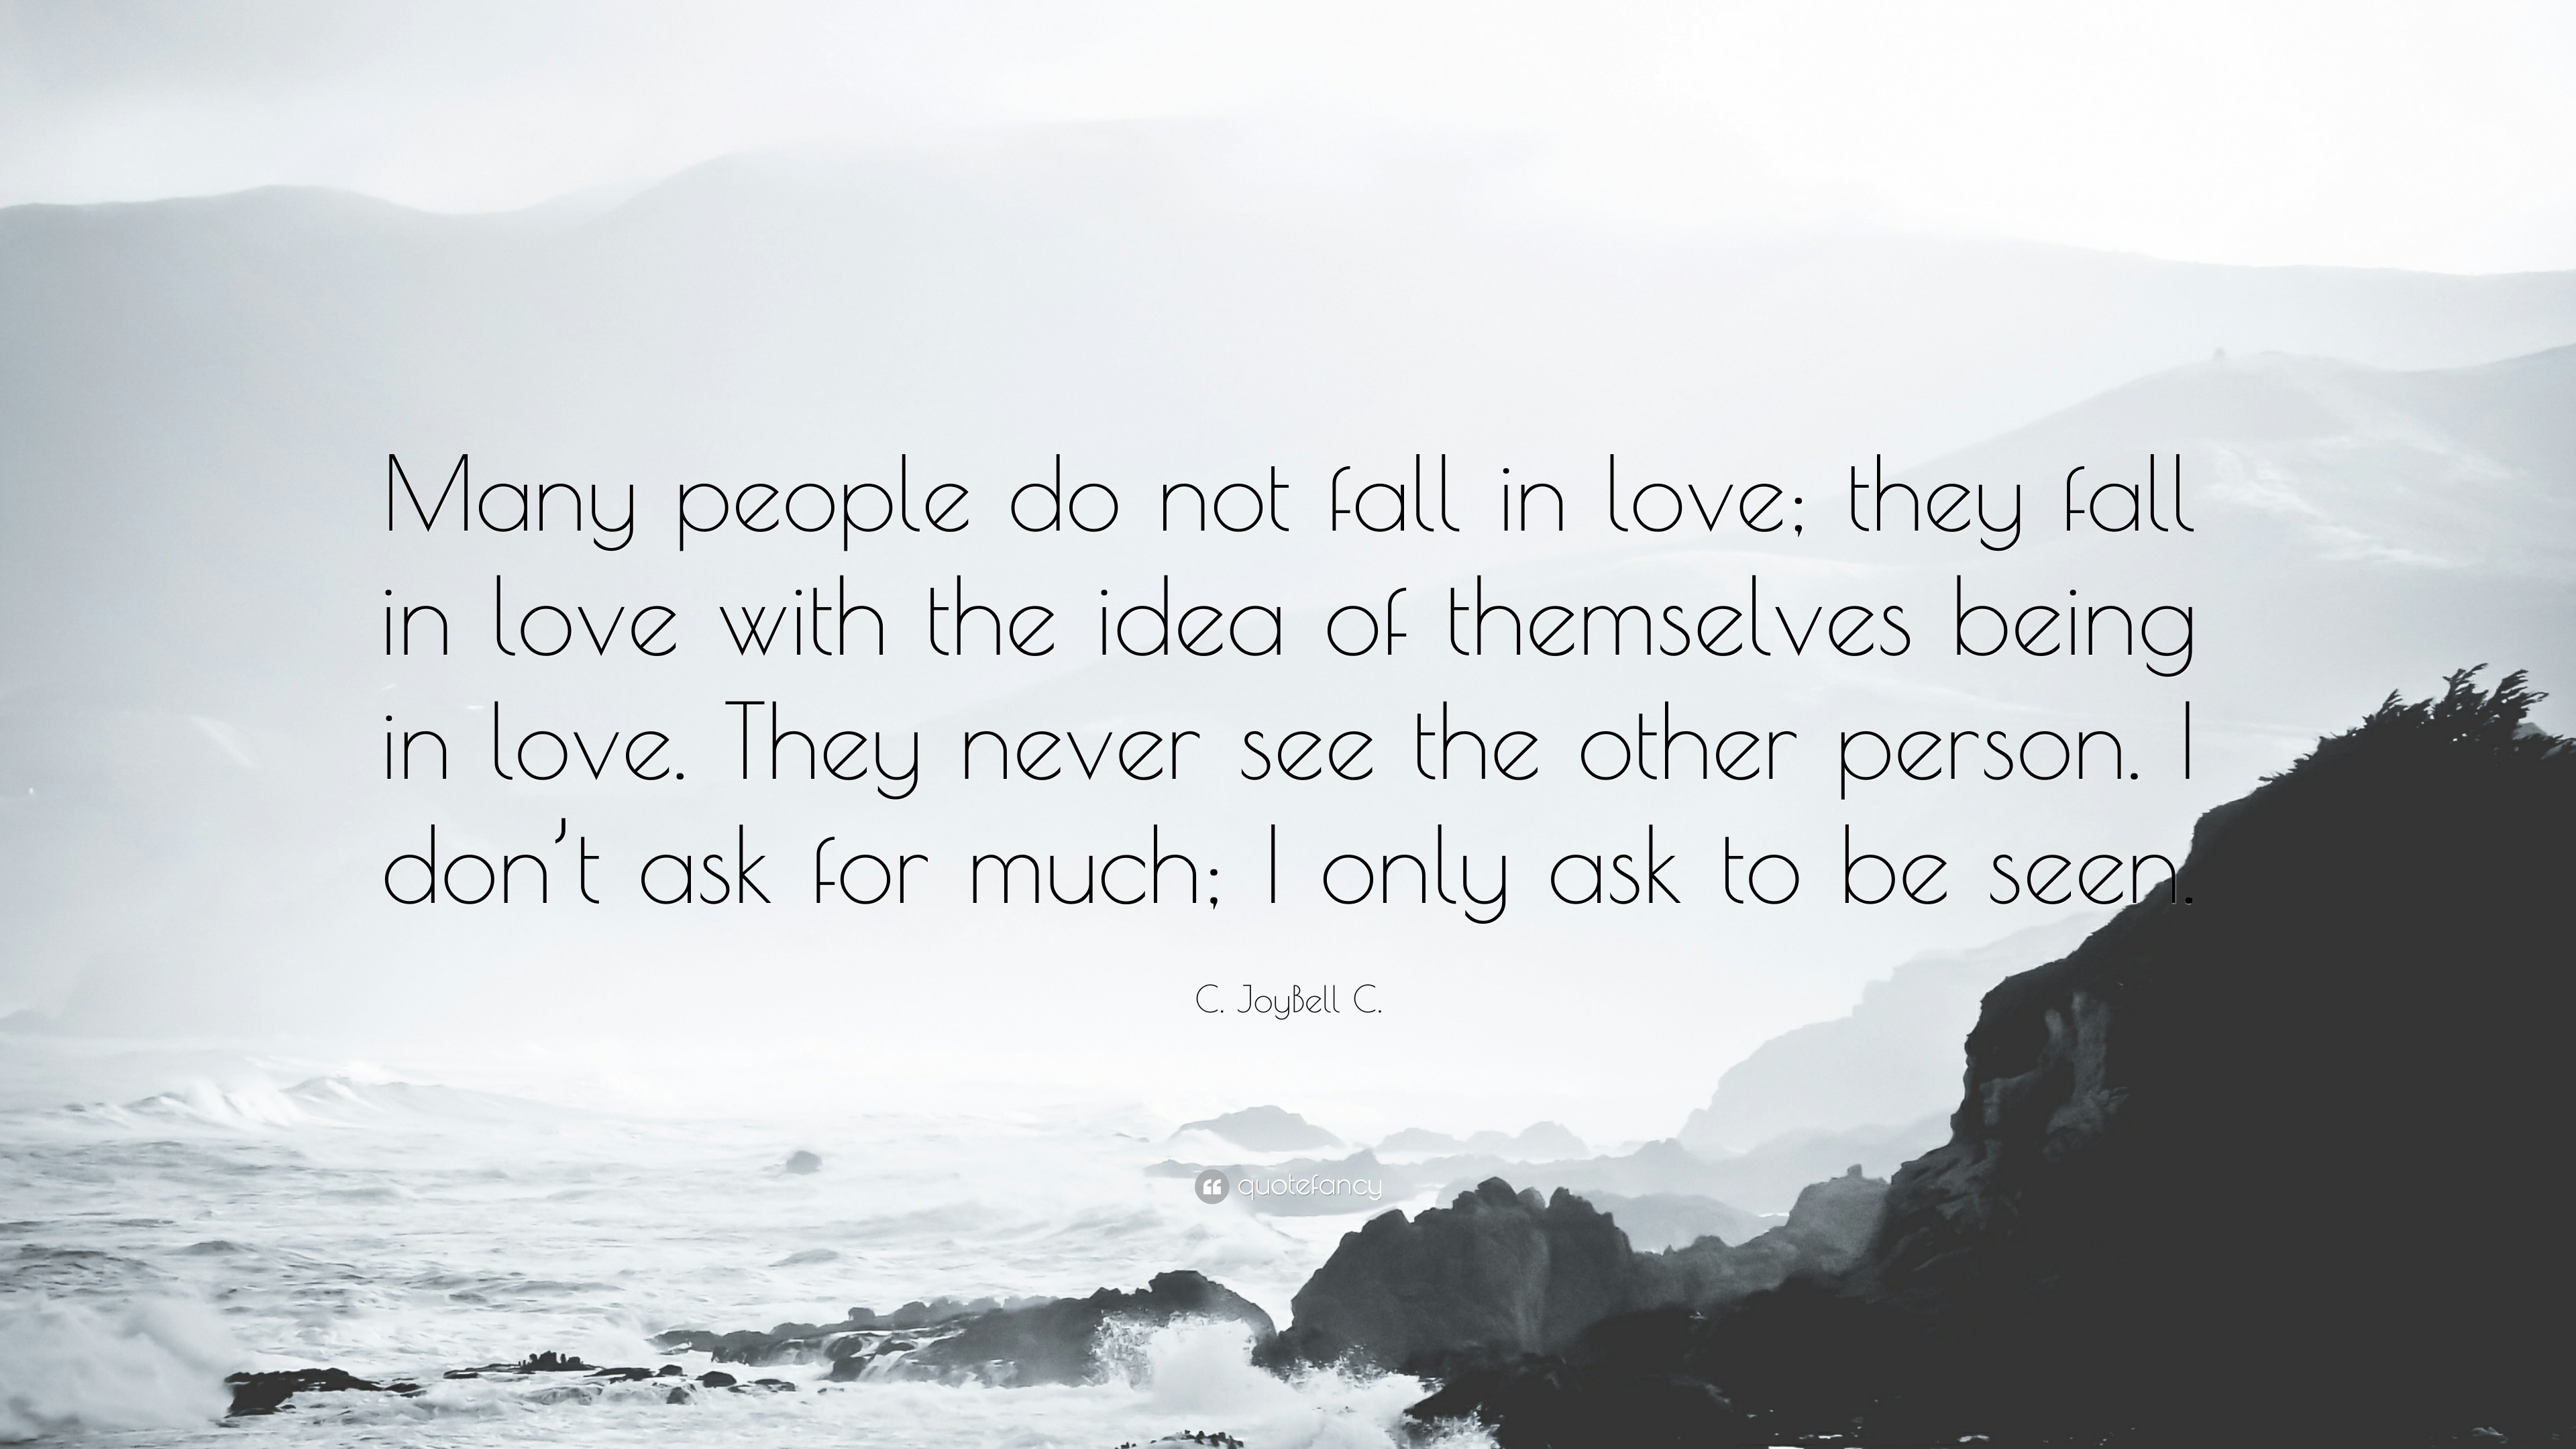 C JoyBell C Quote “Many people do not fall in love